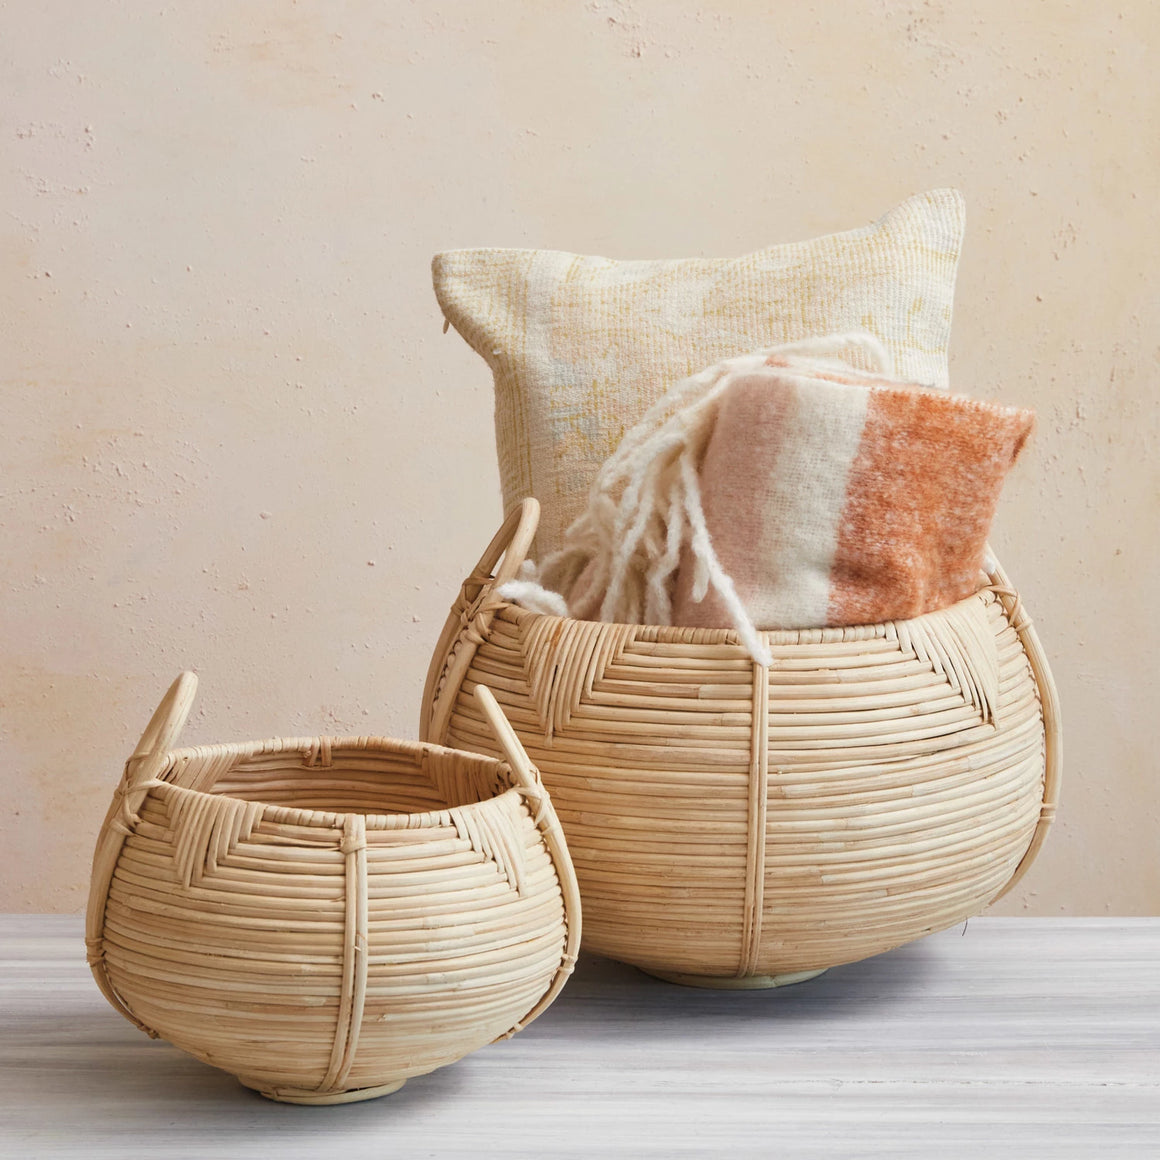 Hand-Woven Rattan Baskets with Handles